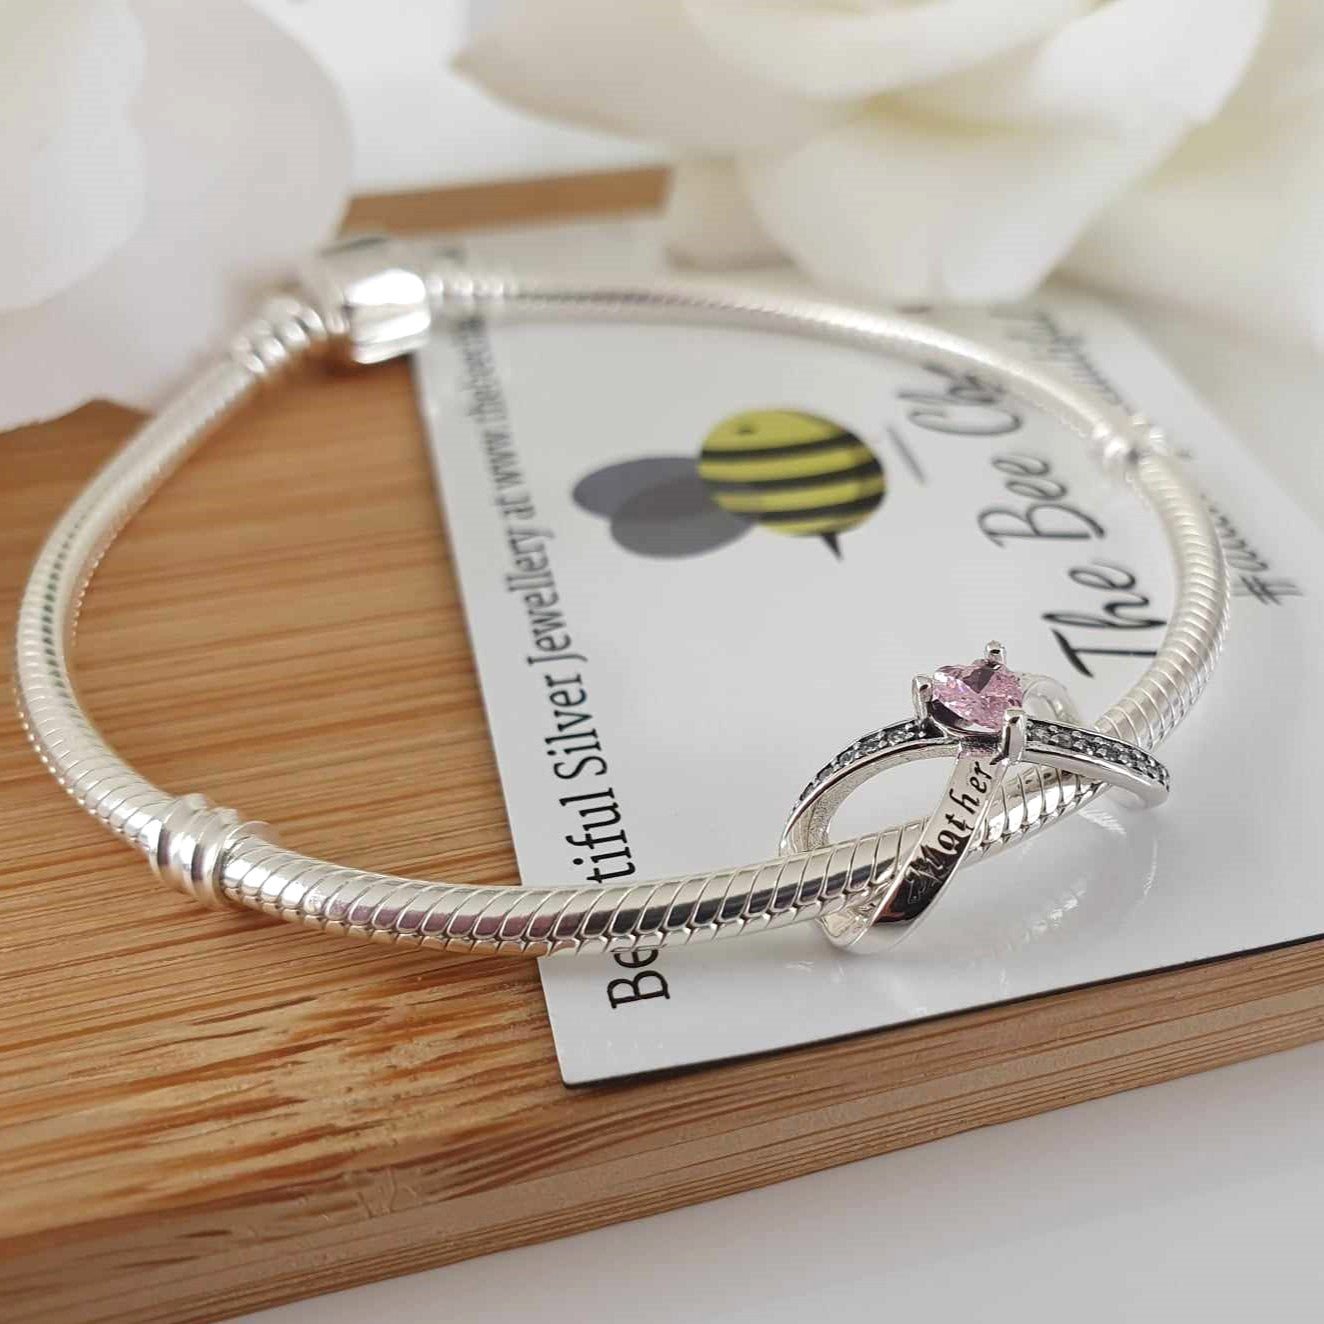 Mother & Daughter Forever Charm - The Bee Charm